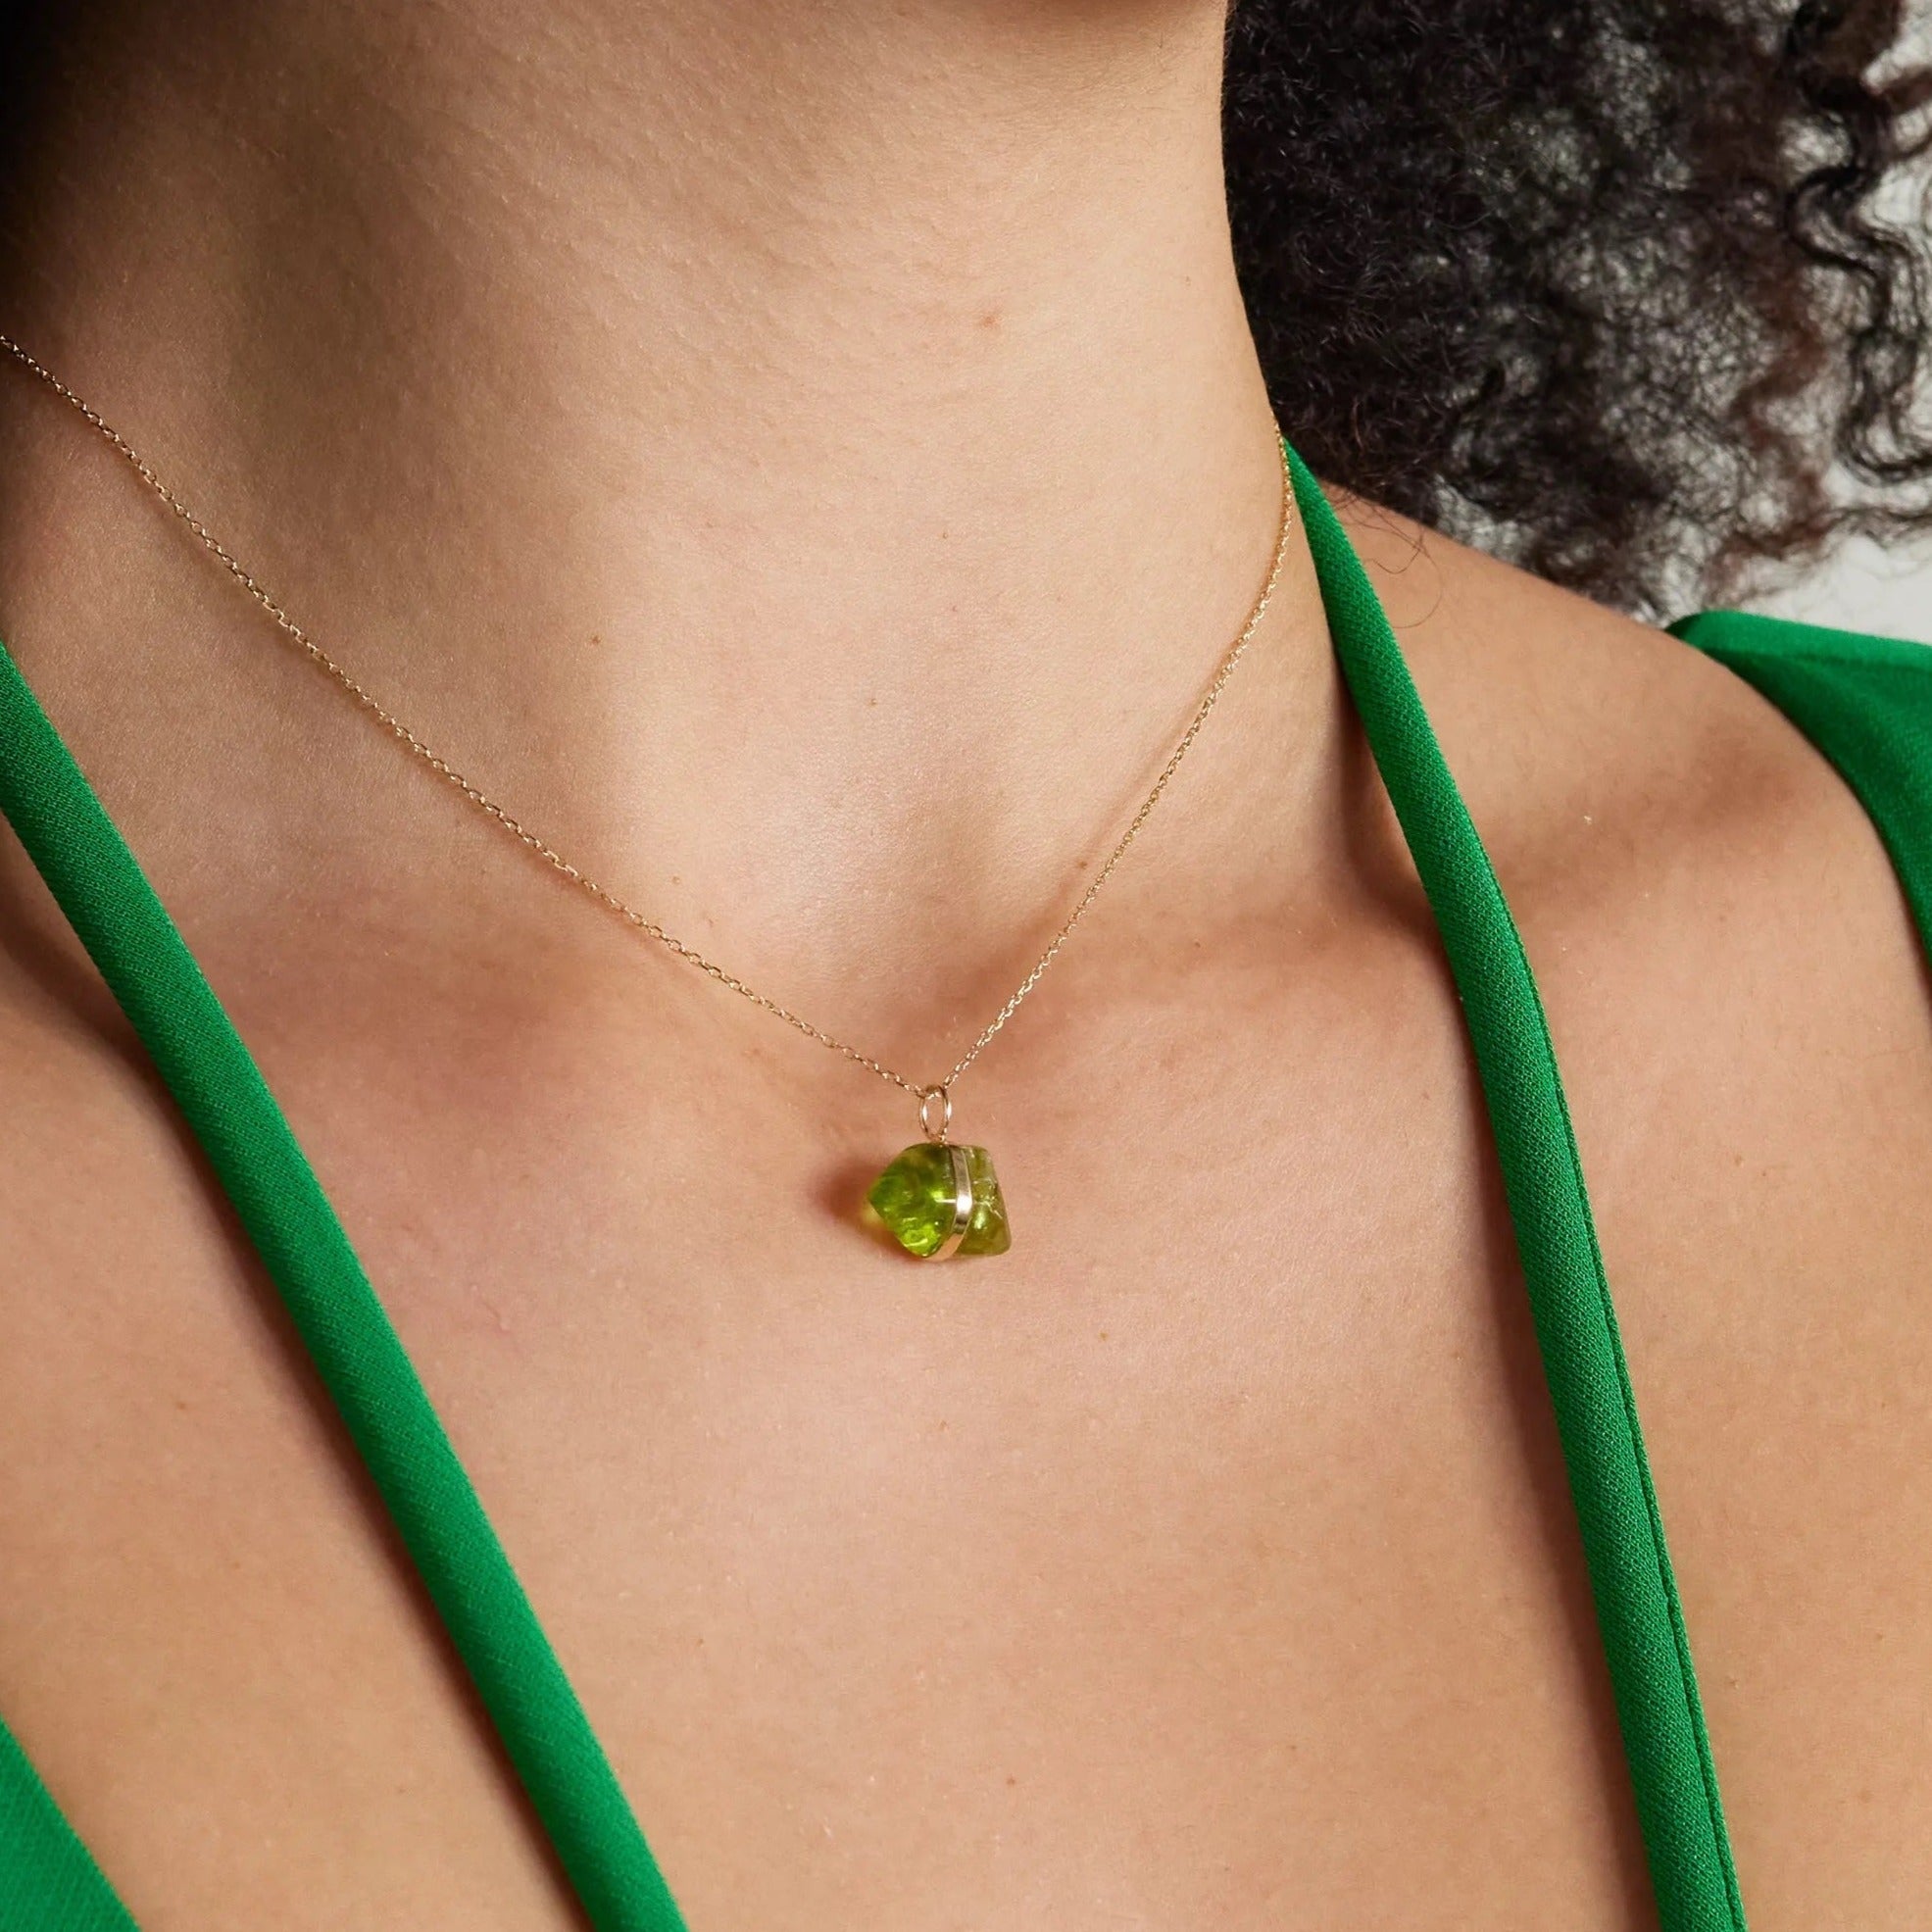 Buy Square Pendant Necklace Peridot Gemstone Necklace Gold Peridot Pendant  Necklace August Birthstone Necklace for Women Online in India - Etsy